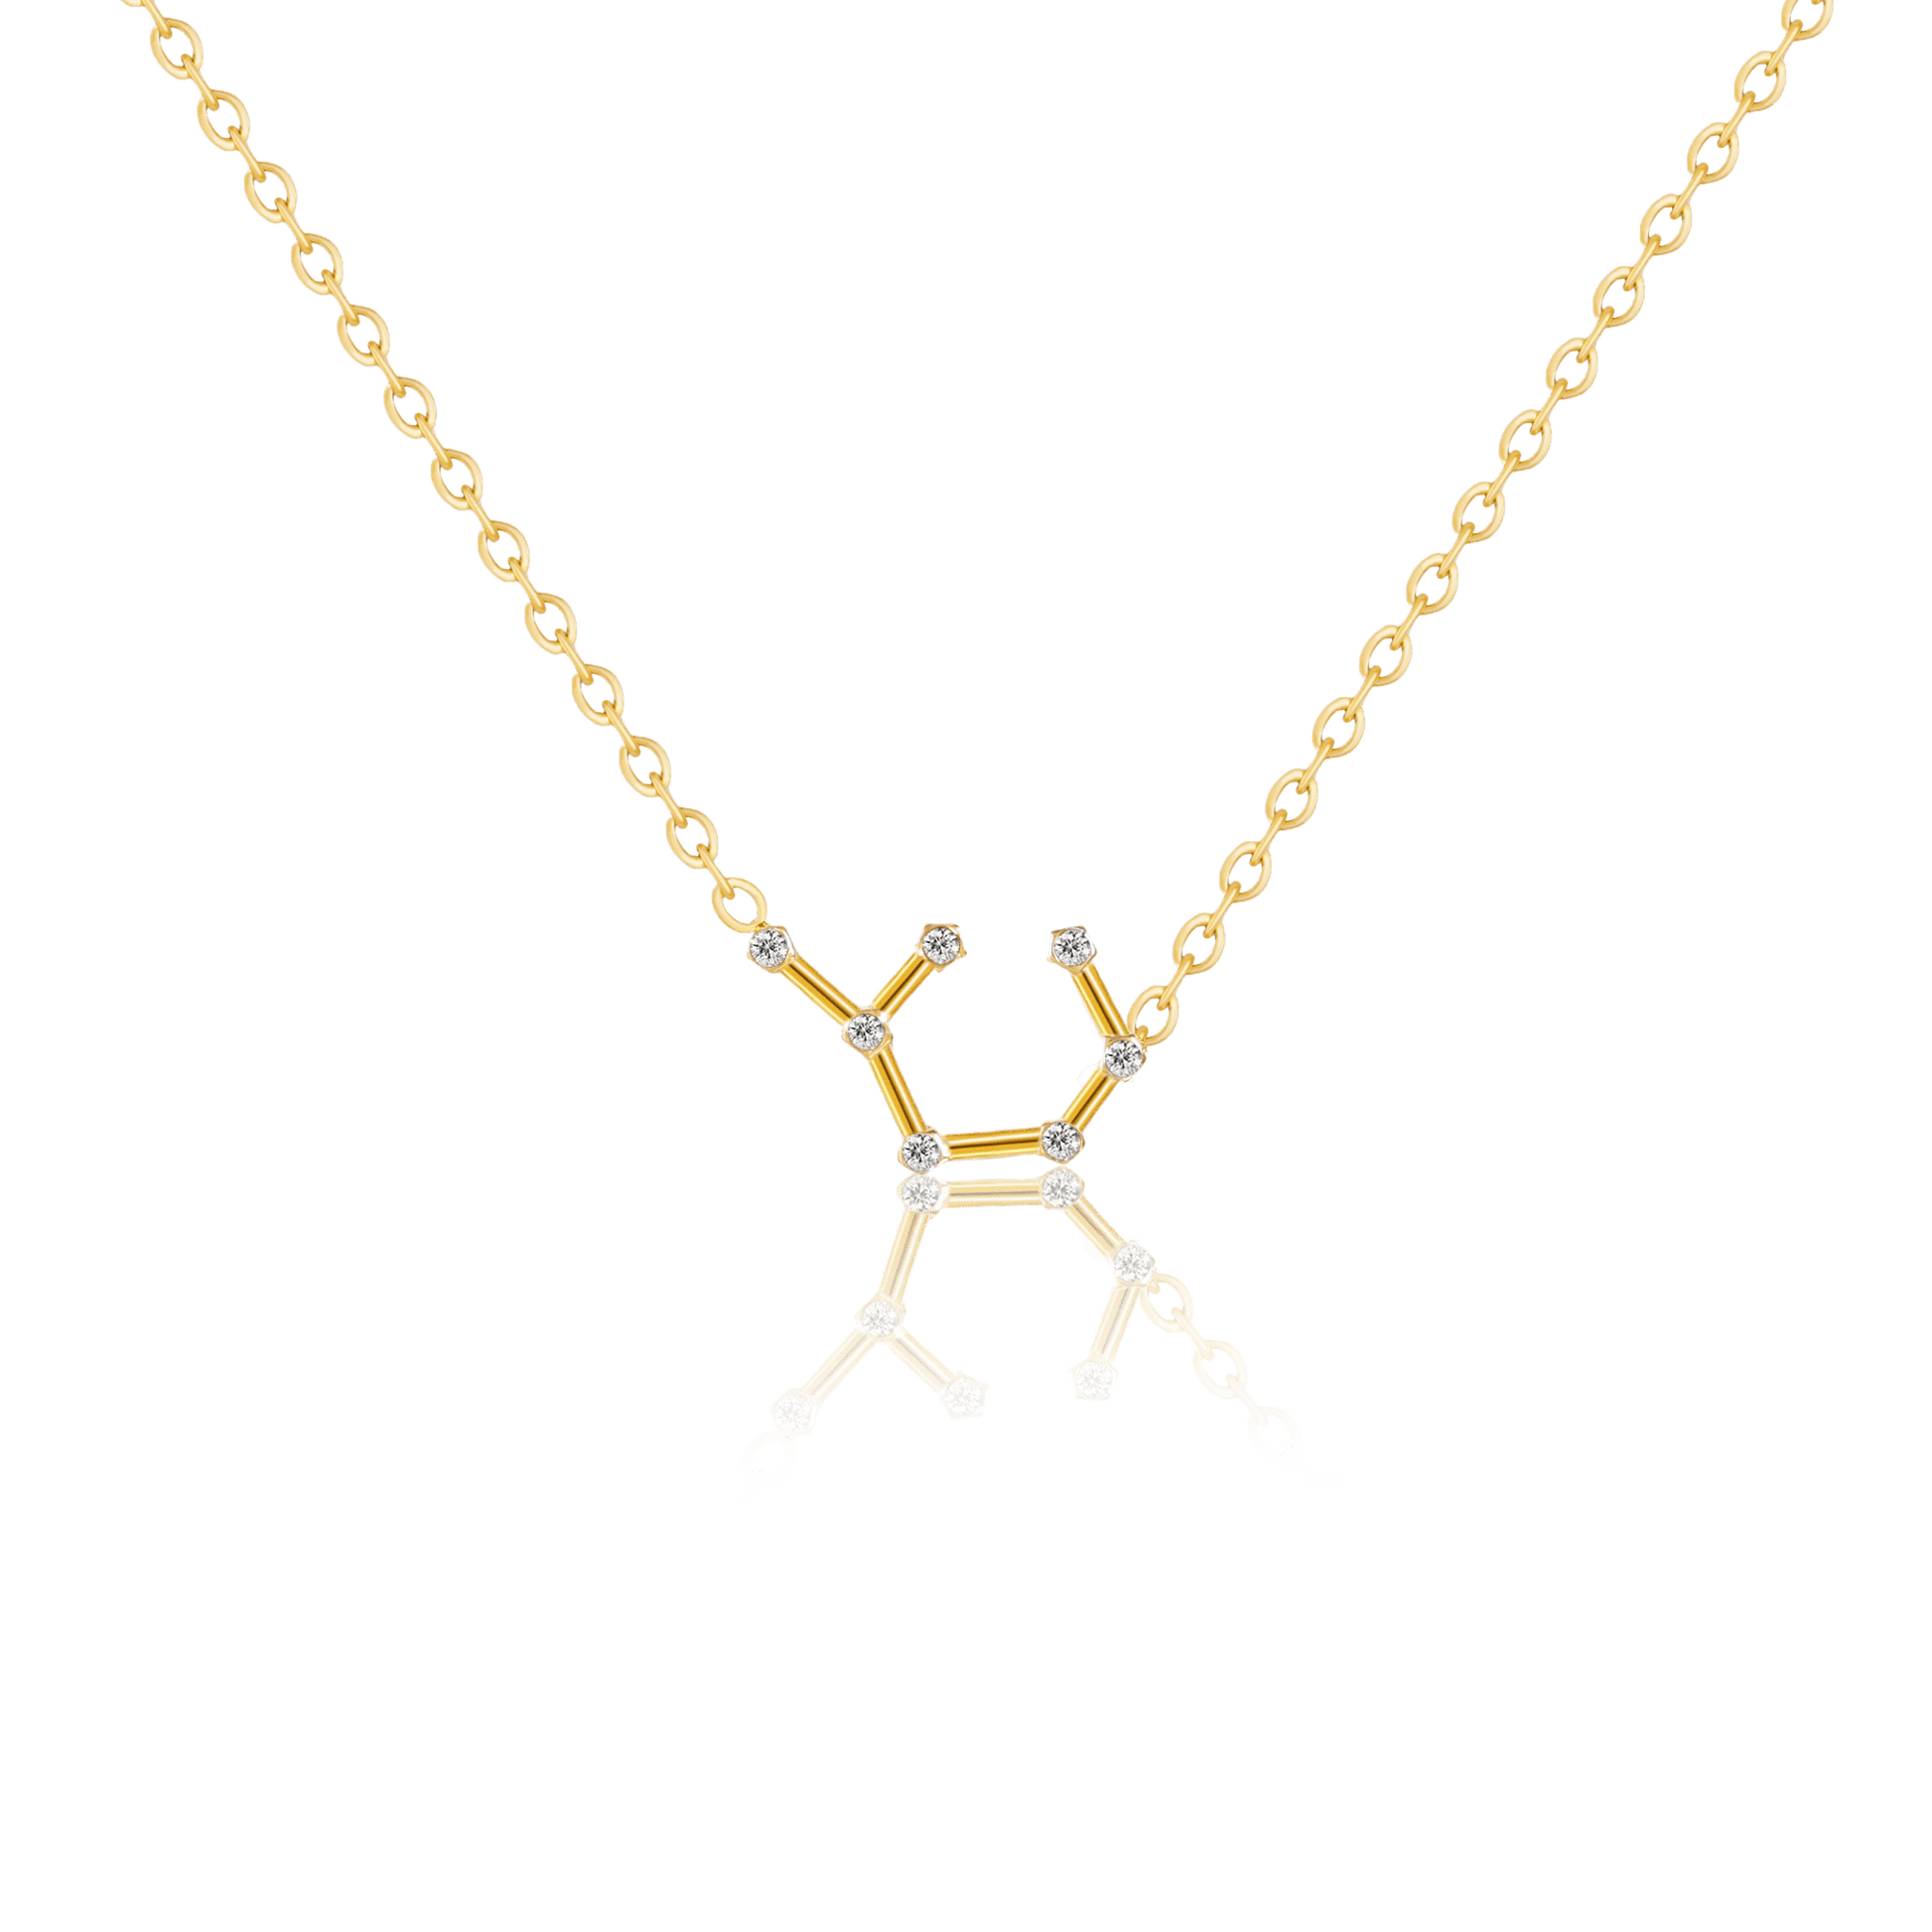 bianco rosso Necklaces Sagittarius Zircon Gold Necklace cyprus greece jewelry gift free shipping europe worldwide